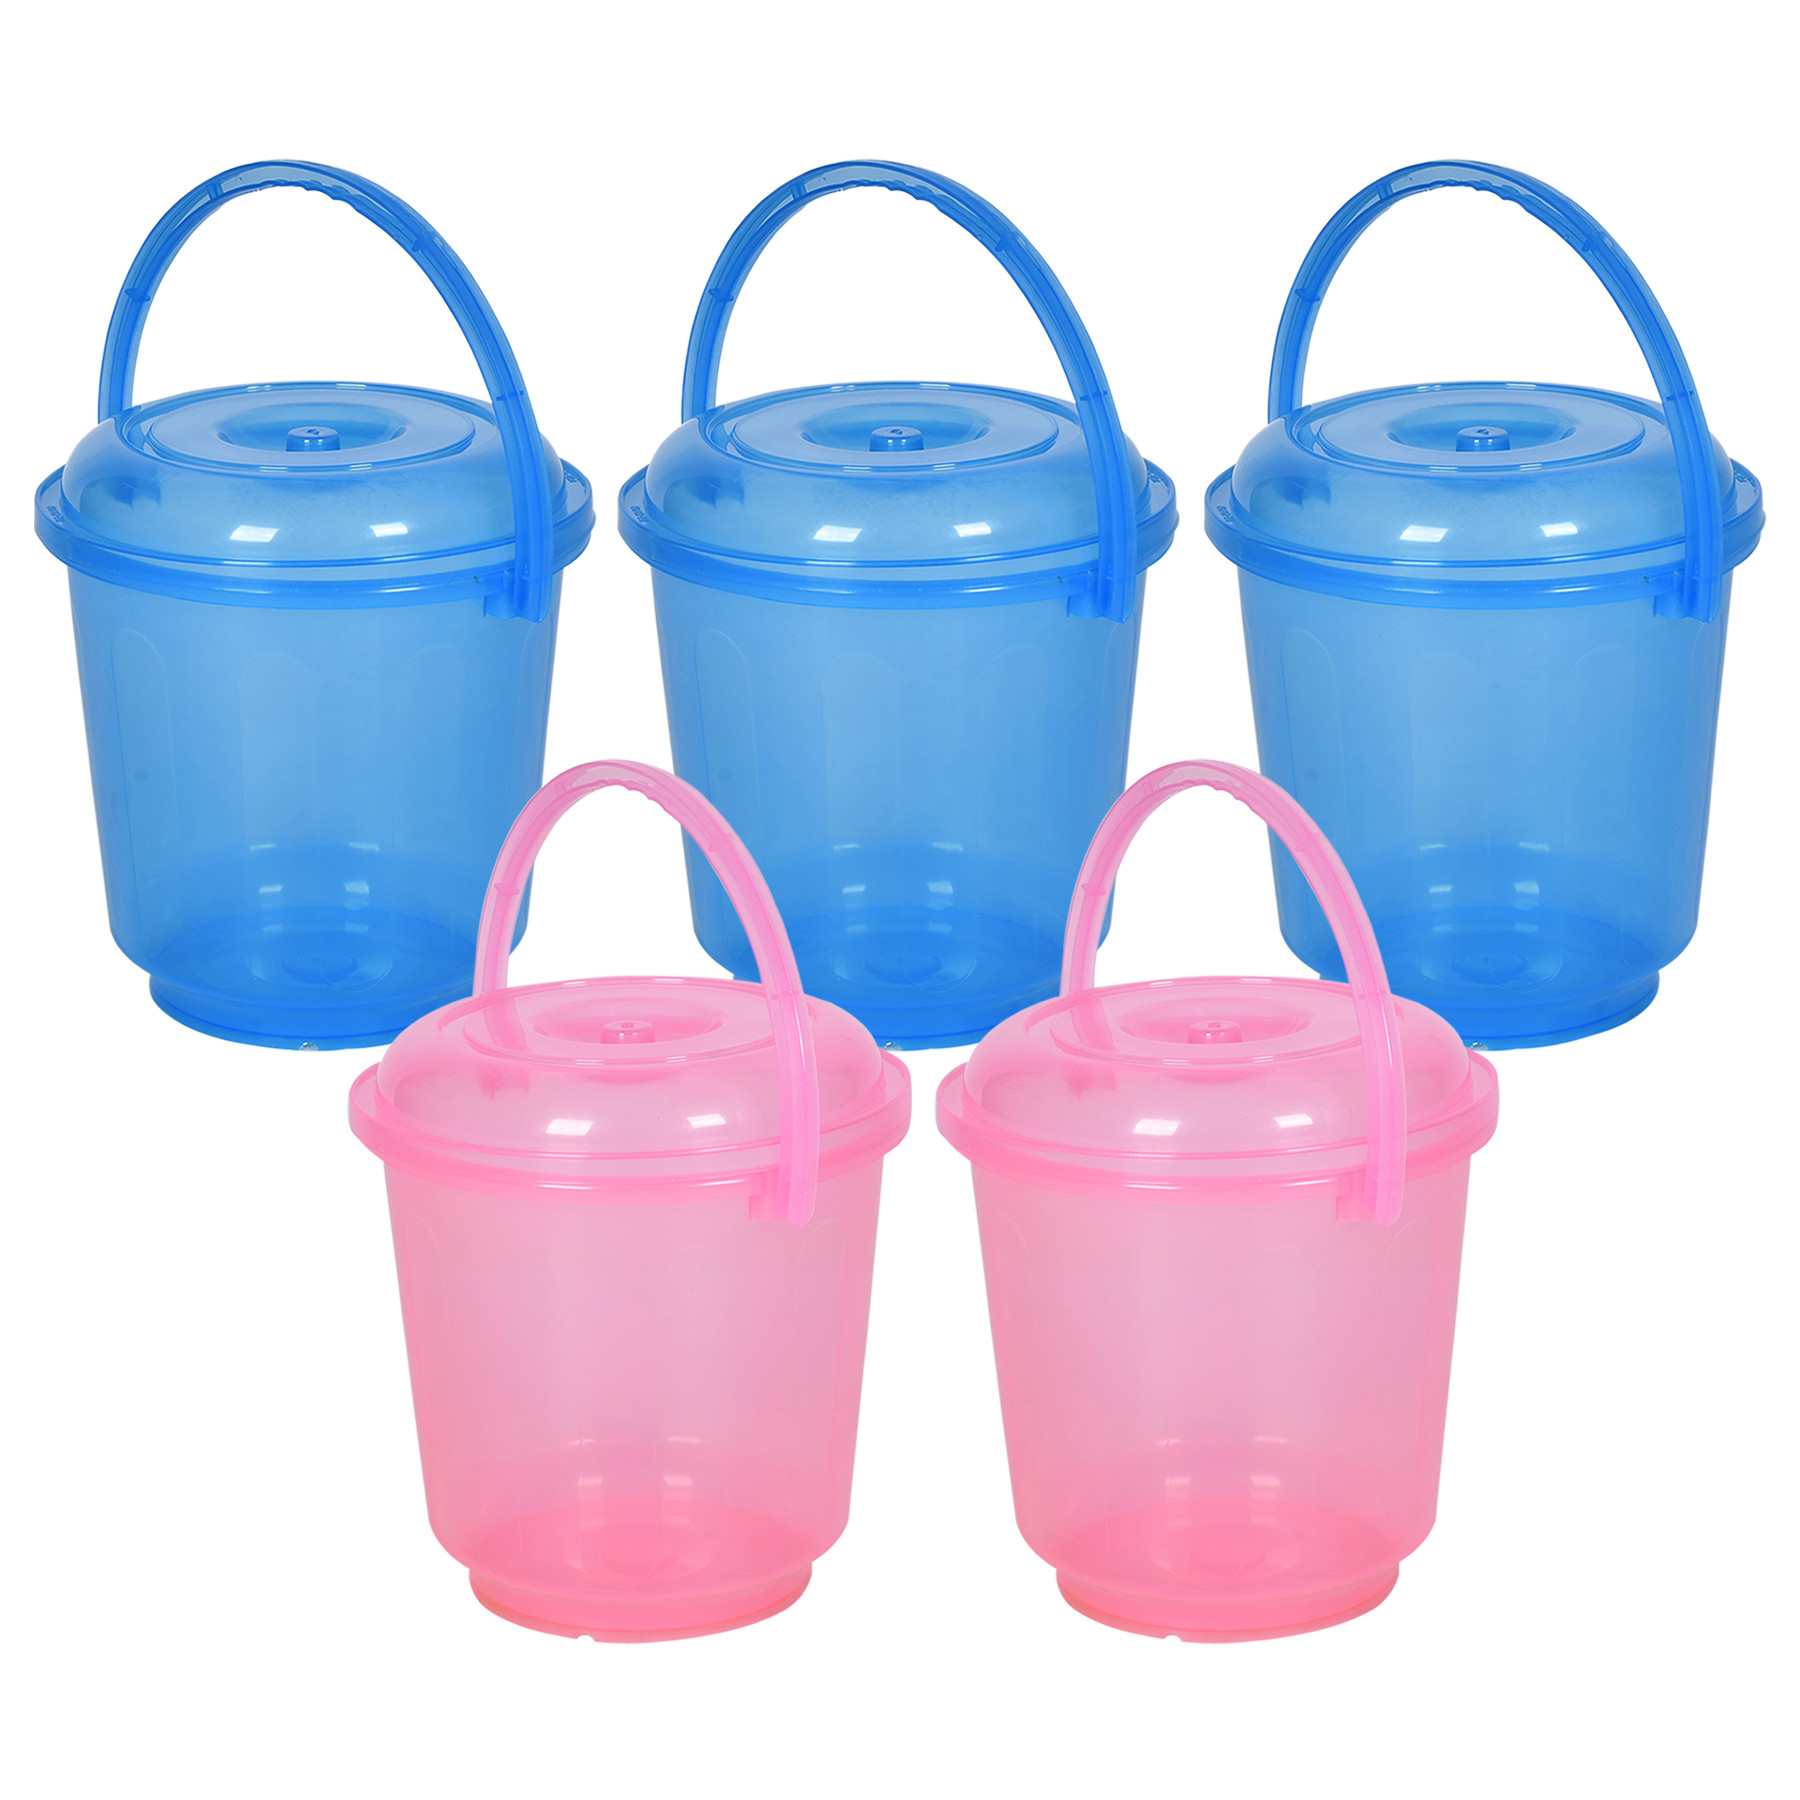 Kuber Industries Bucket | Bathroom Bucket | Utility Bucket for Daily Use | Water Storage Bucket | Bathing Bucket with Handle & Lid | 13 LTR | SUPER-013 | Transparent | Blue & Pink